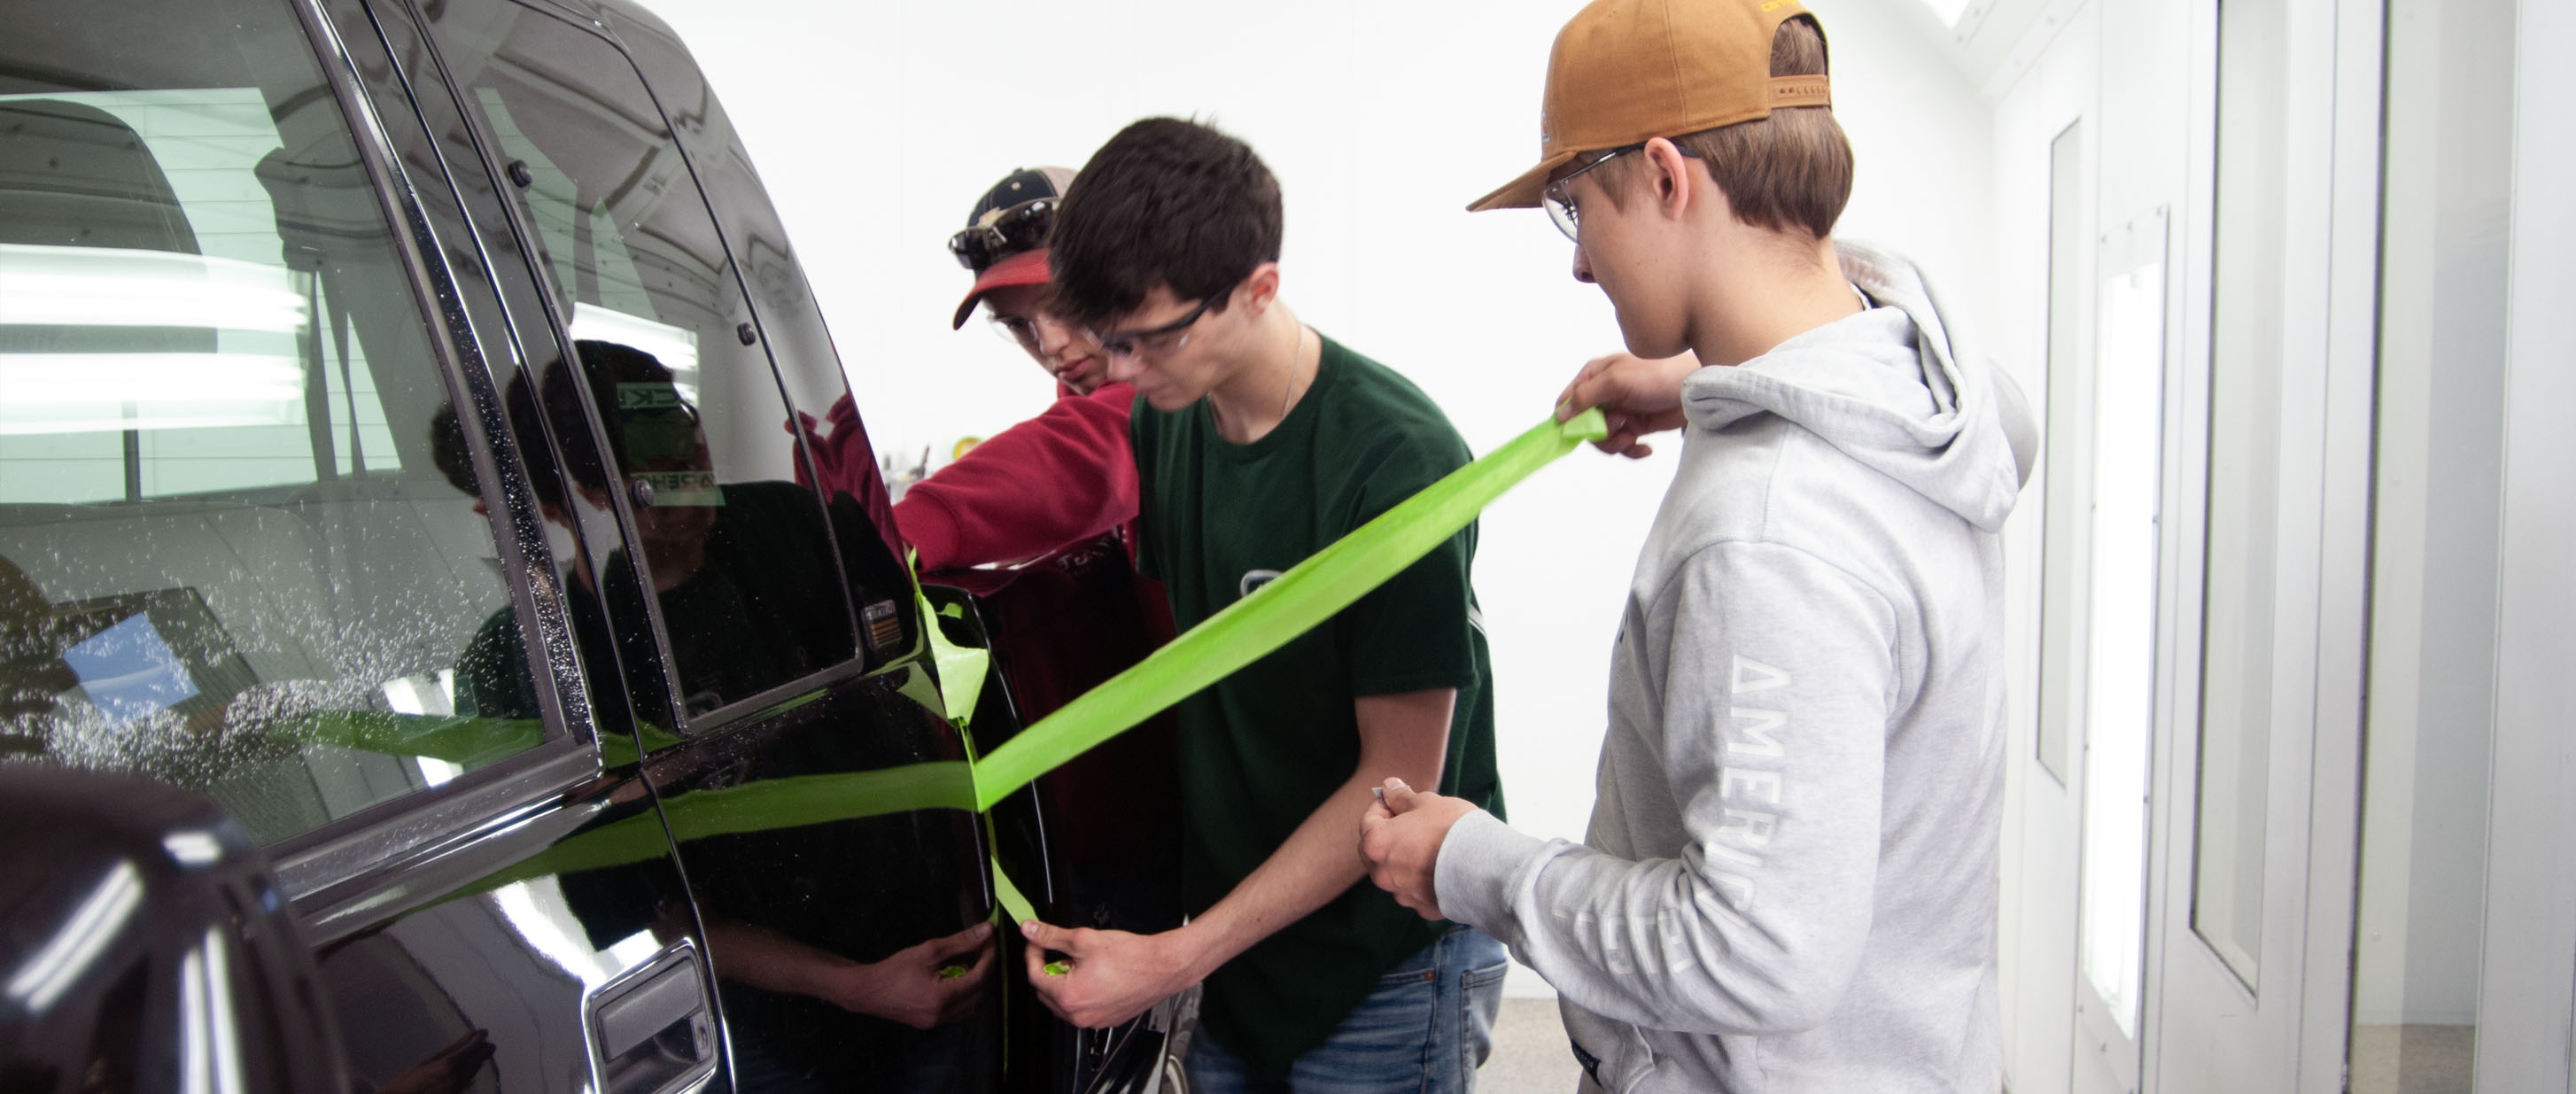 Students taping truck